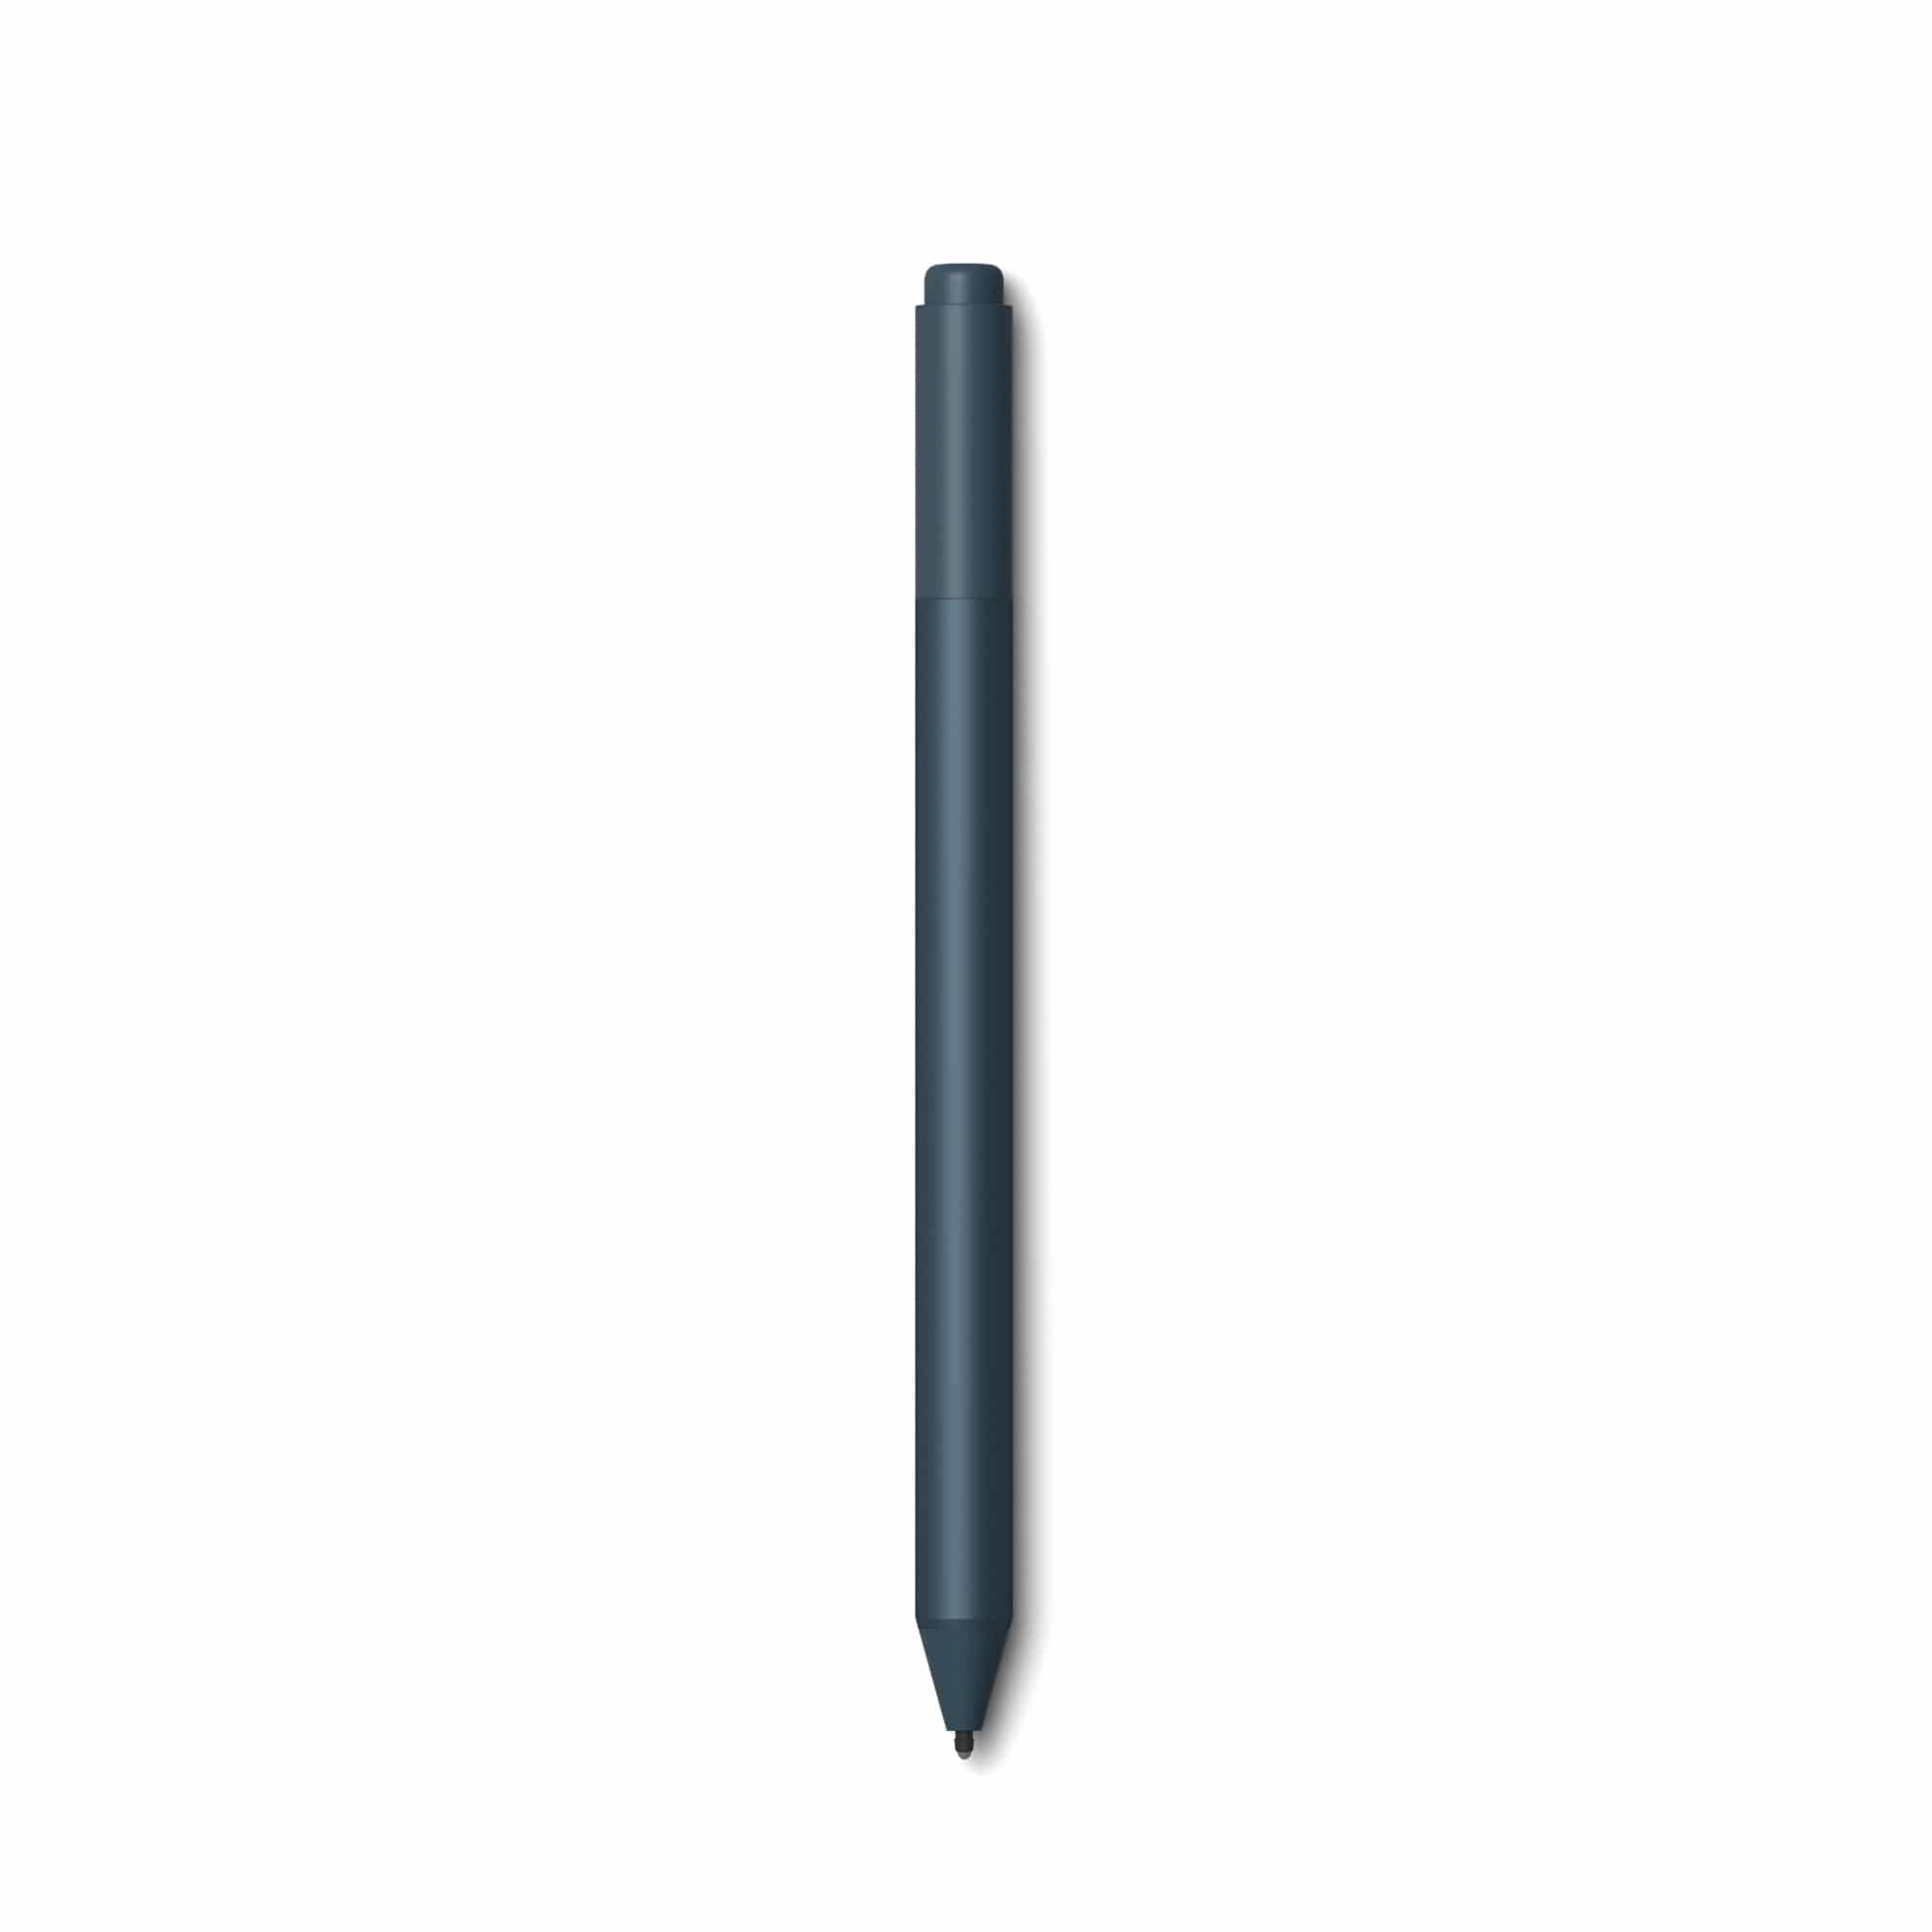 Surface pen - 20+ cool products for back to school